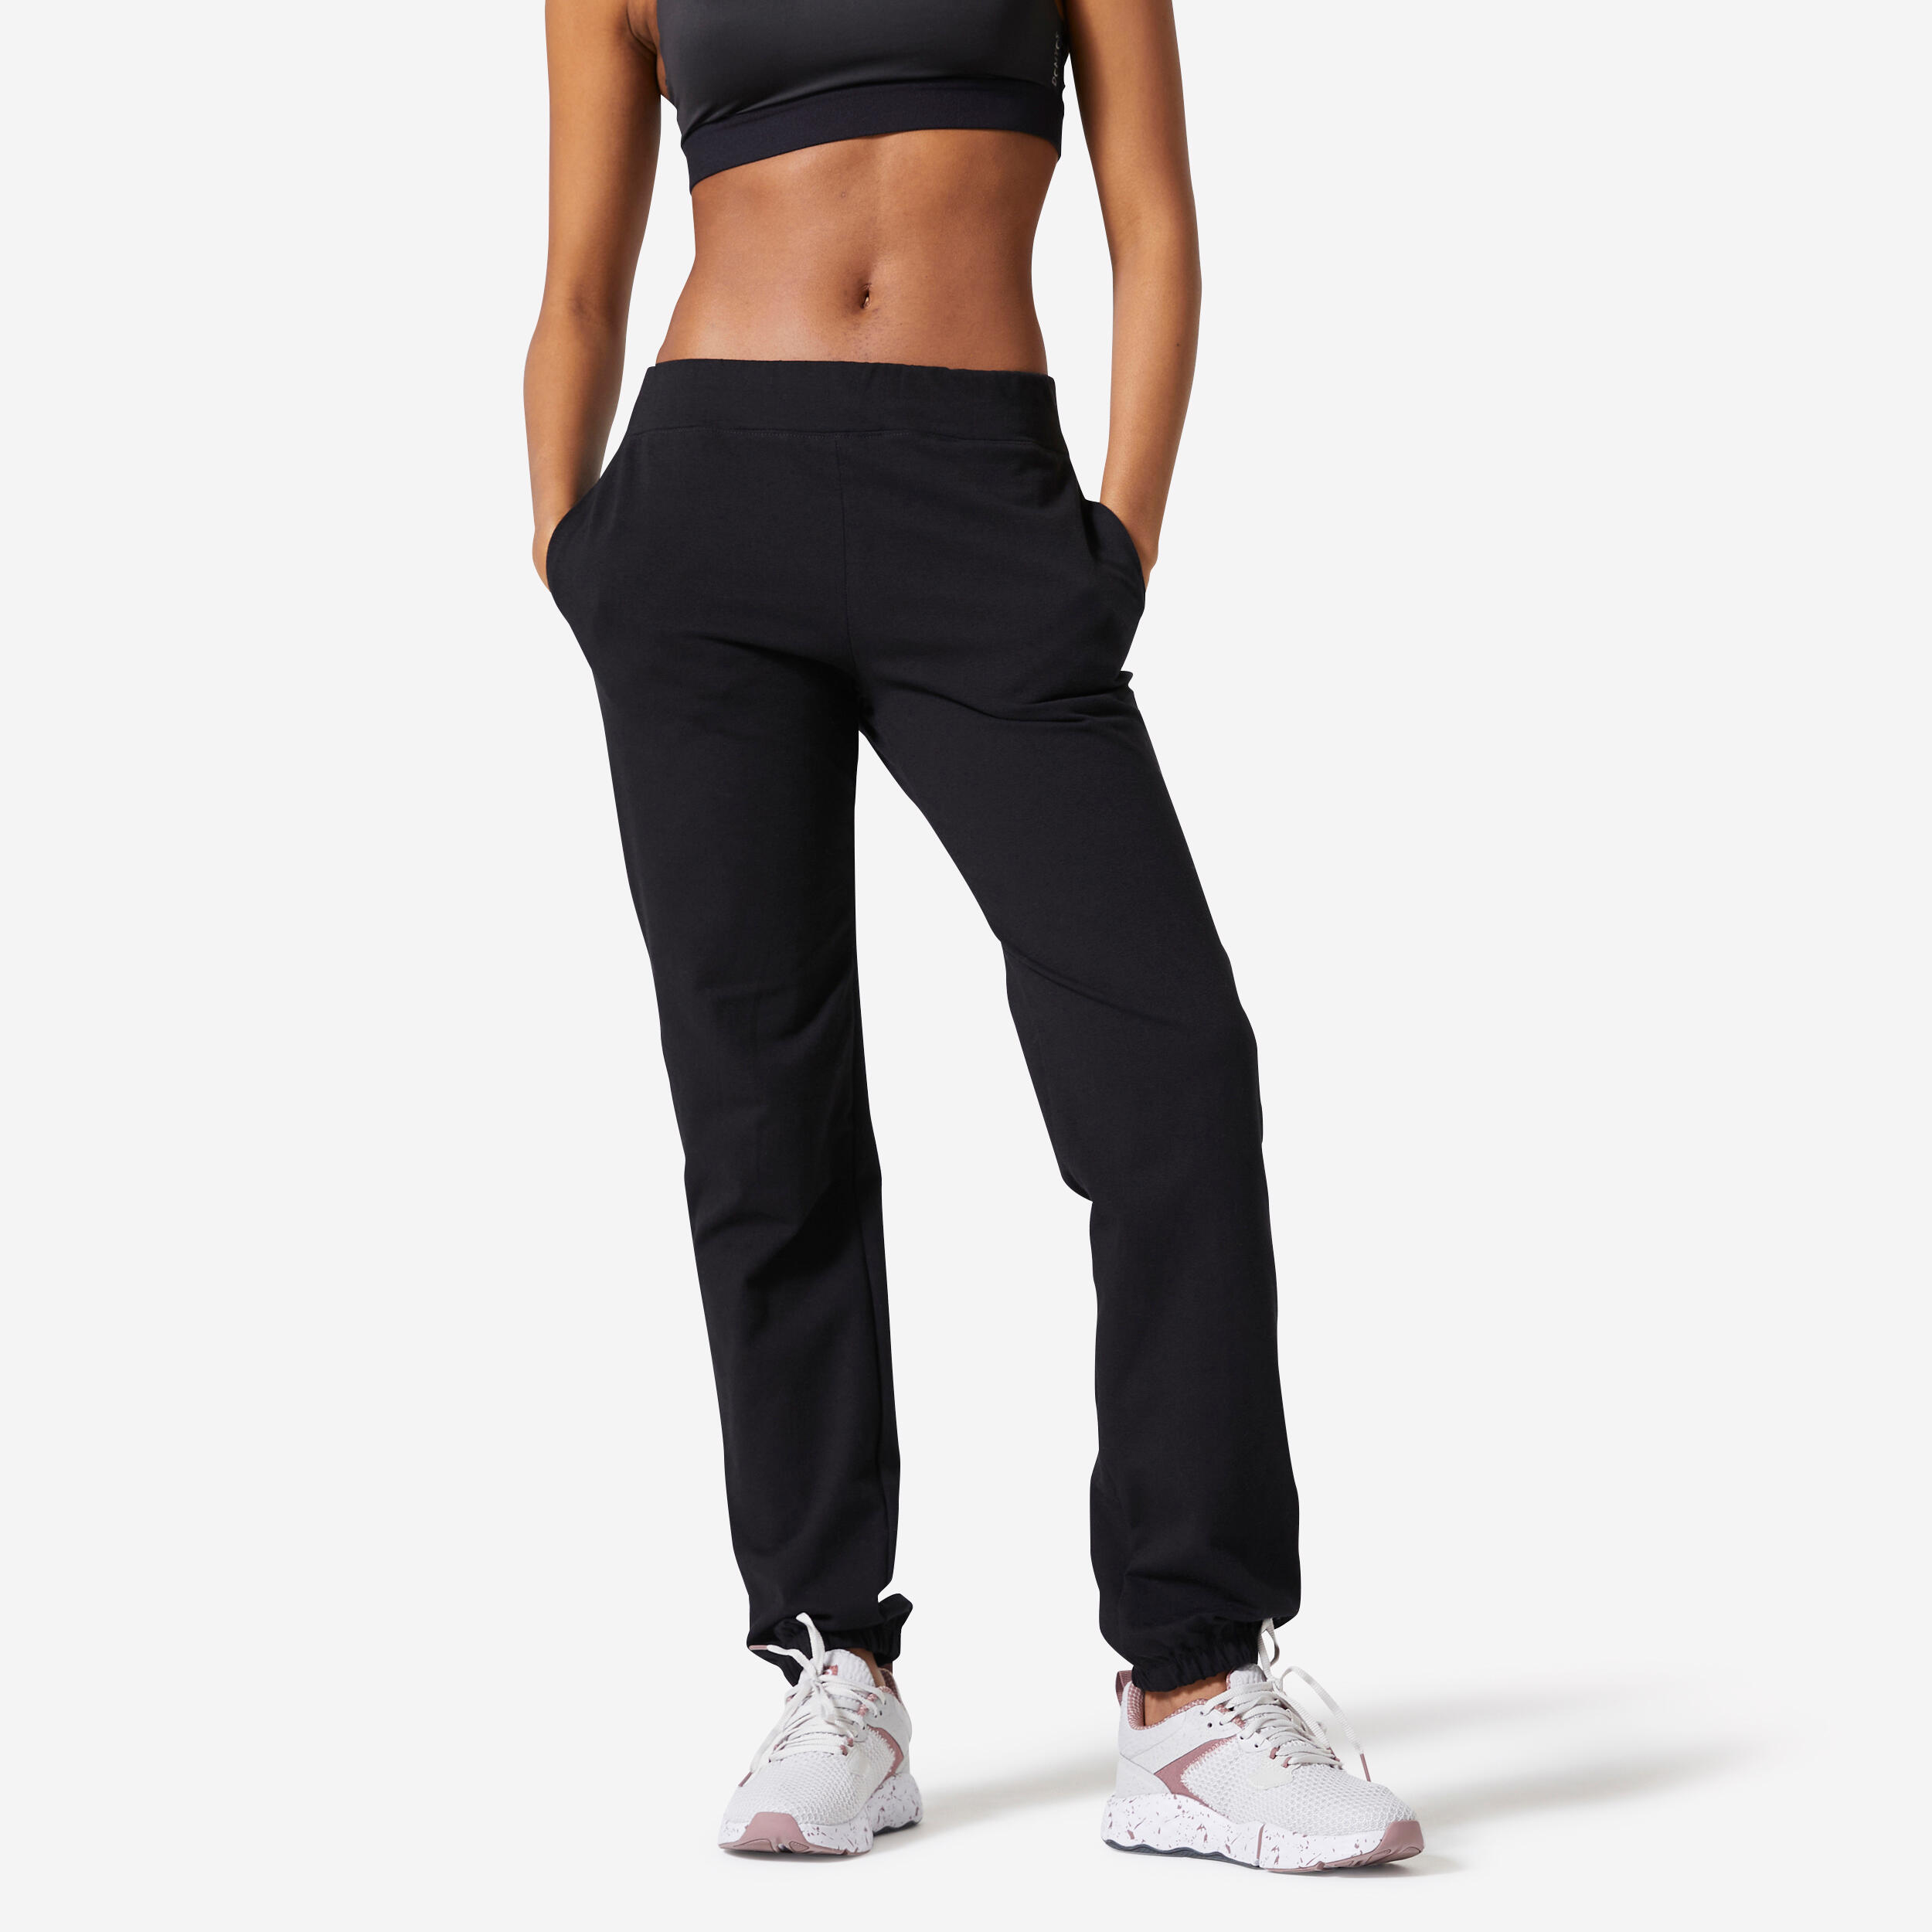 Women's Exercise Pants for sale